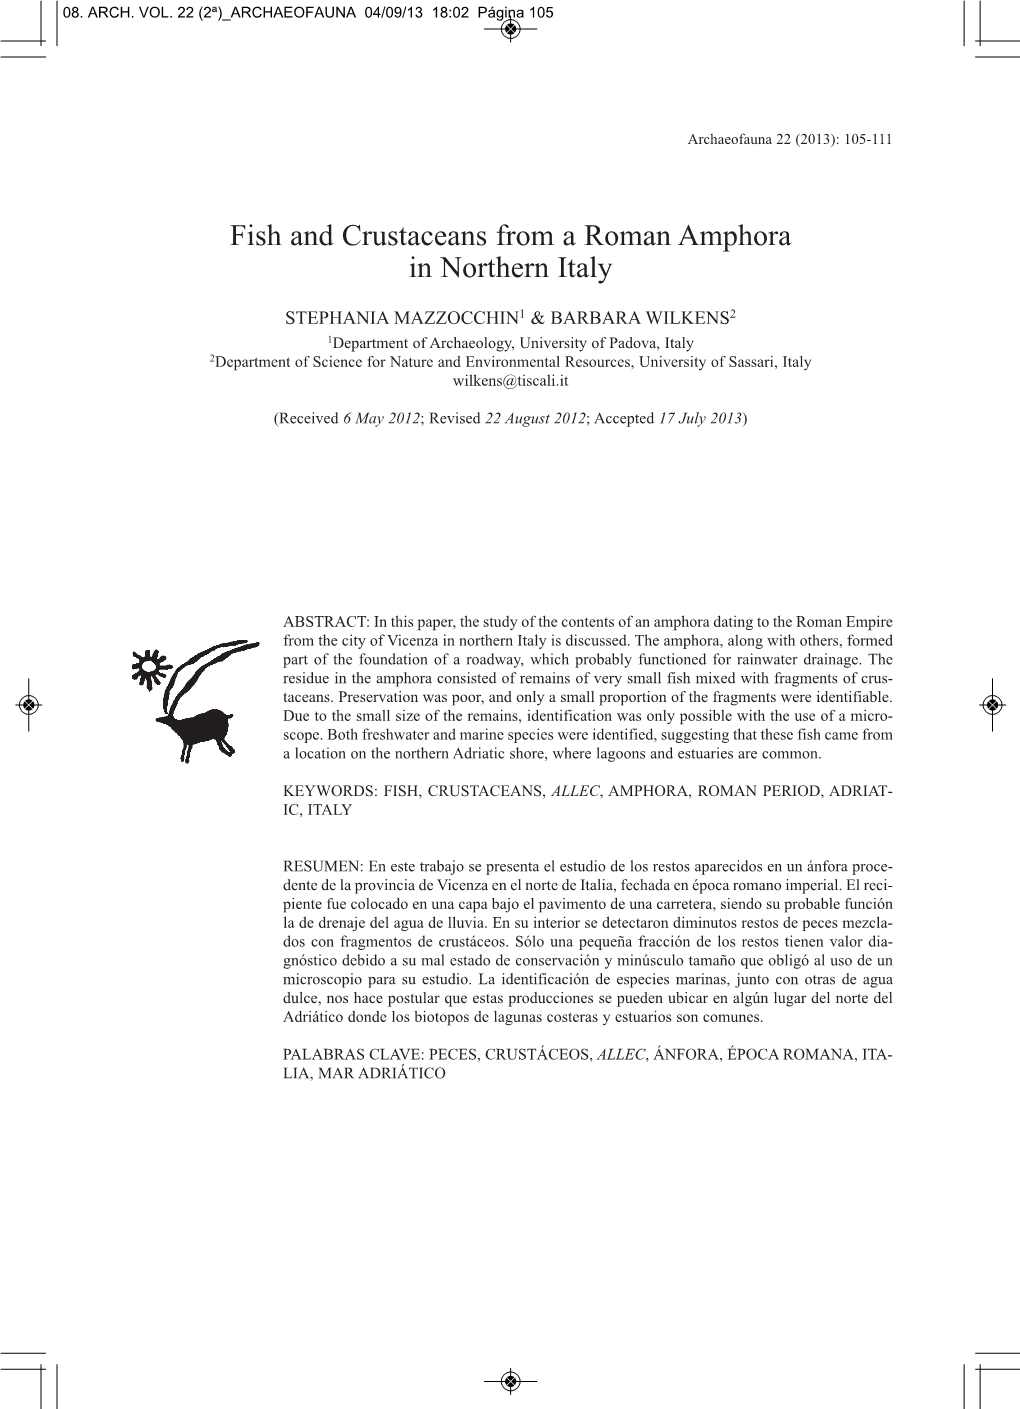 Fish and Crustaceans from a Roman Amphora in Northern Italy